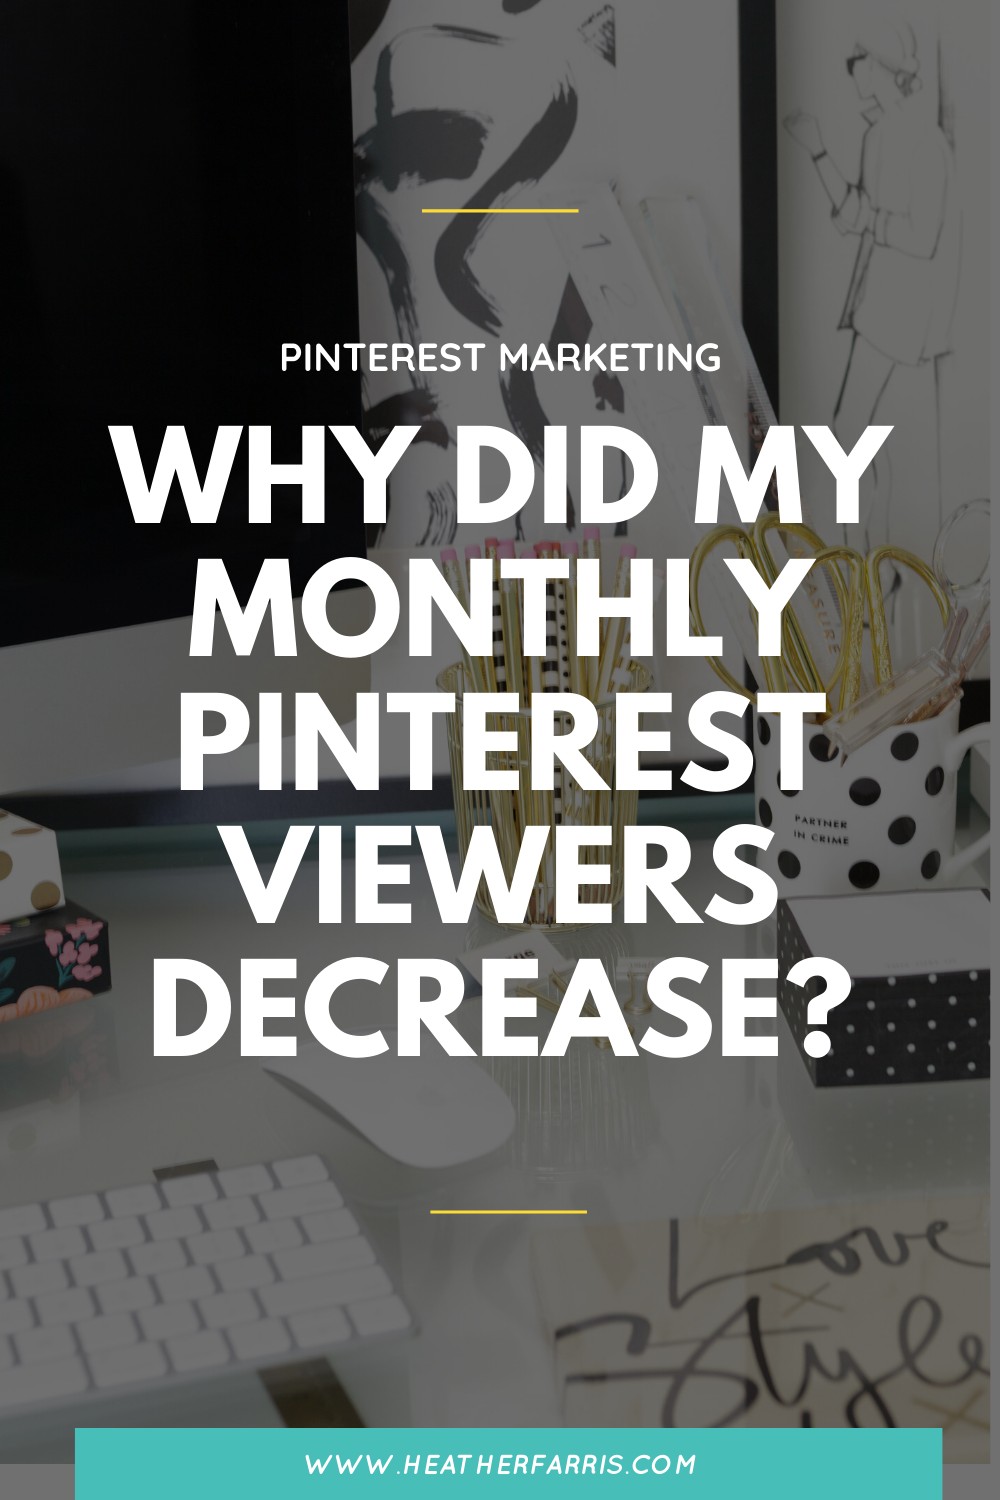 Pinterest viewers are a metric I wish was never established on this wonderful platform. So many people focus on the wrong metric when instead they need to be concerned with how to grow their website traffic and the actual clicks to their site. Learn how to grow your Pinterest traffic and get clicks to your site. Craft a Pinterest marketing strategy that will work for your business no matter what fluctuations you see in your viewers. Grow your email list, grow your blog traffic! #blogtraffic